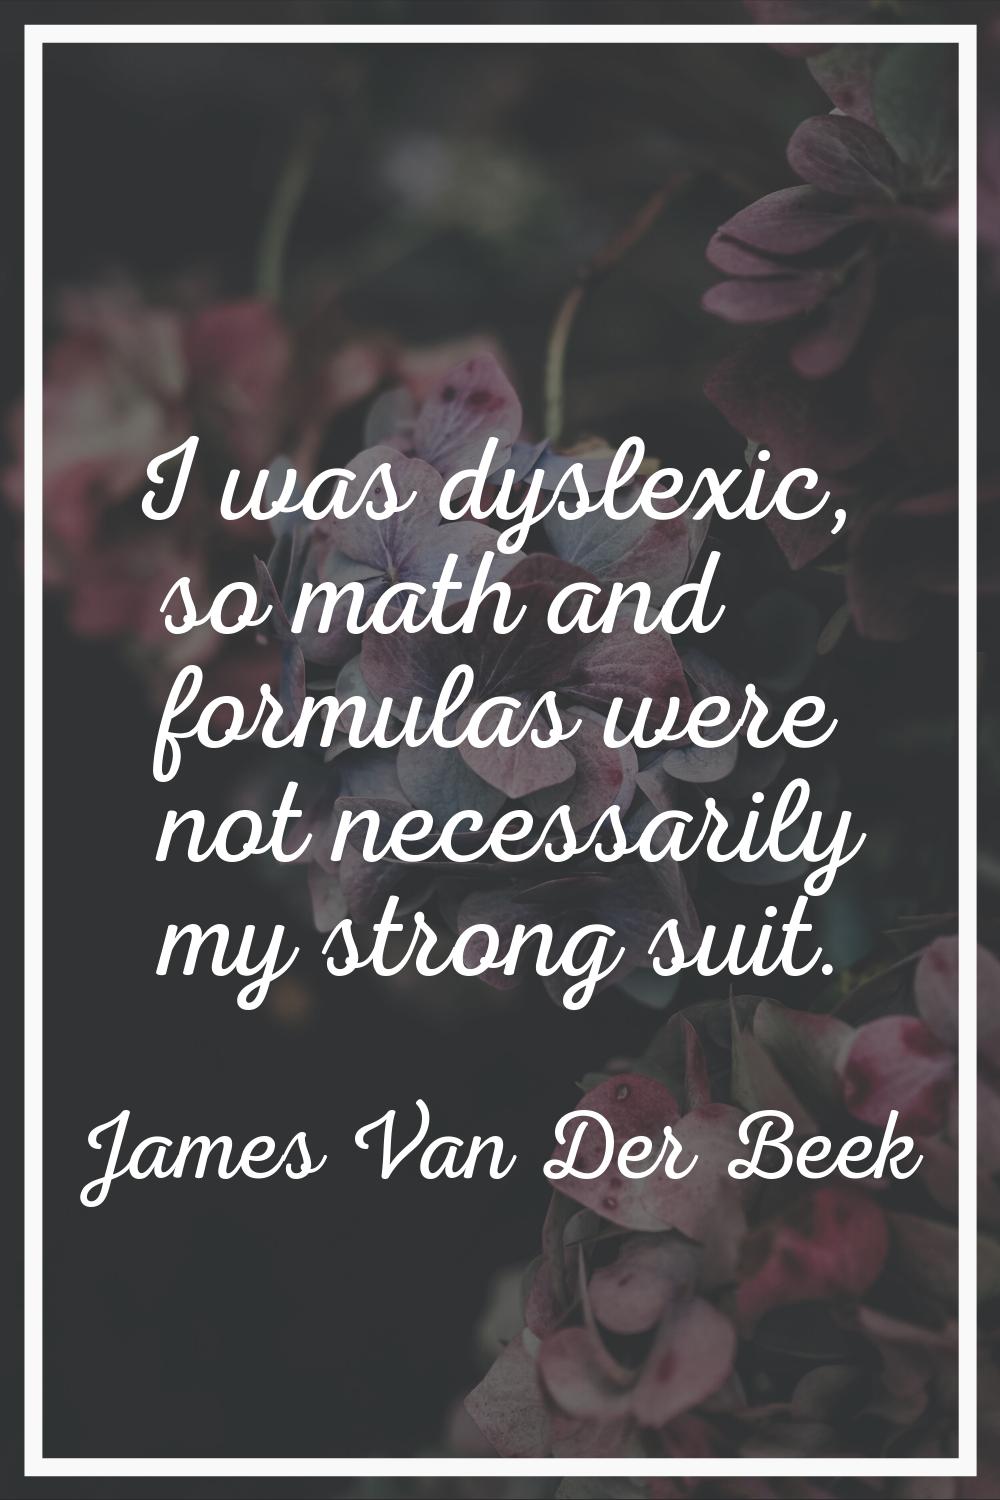 I was dyslexic, so math and formulas were not necessarily my strong suit.